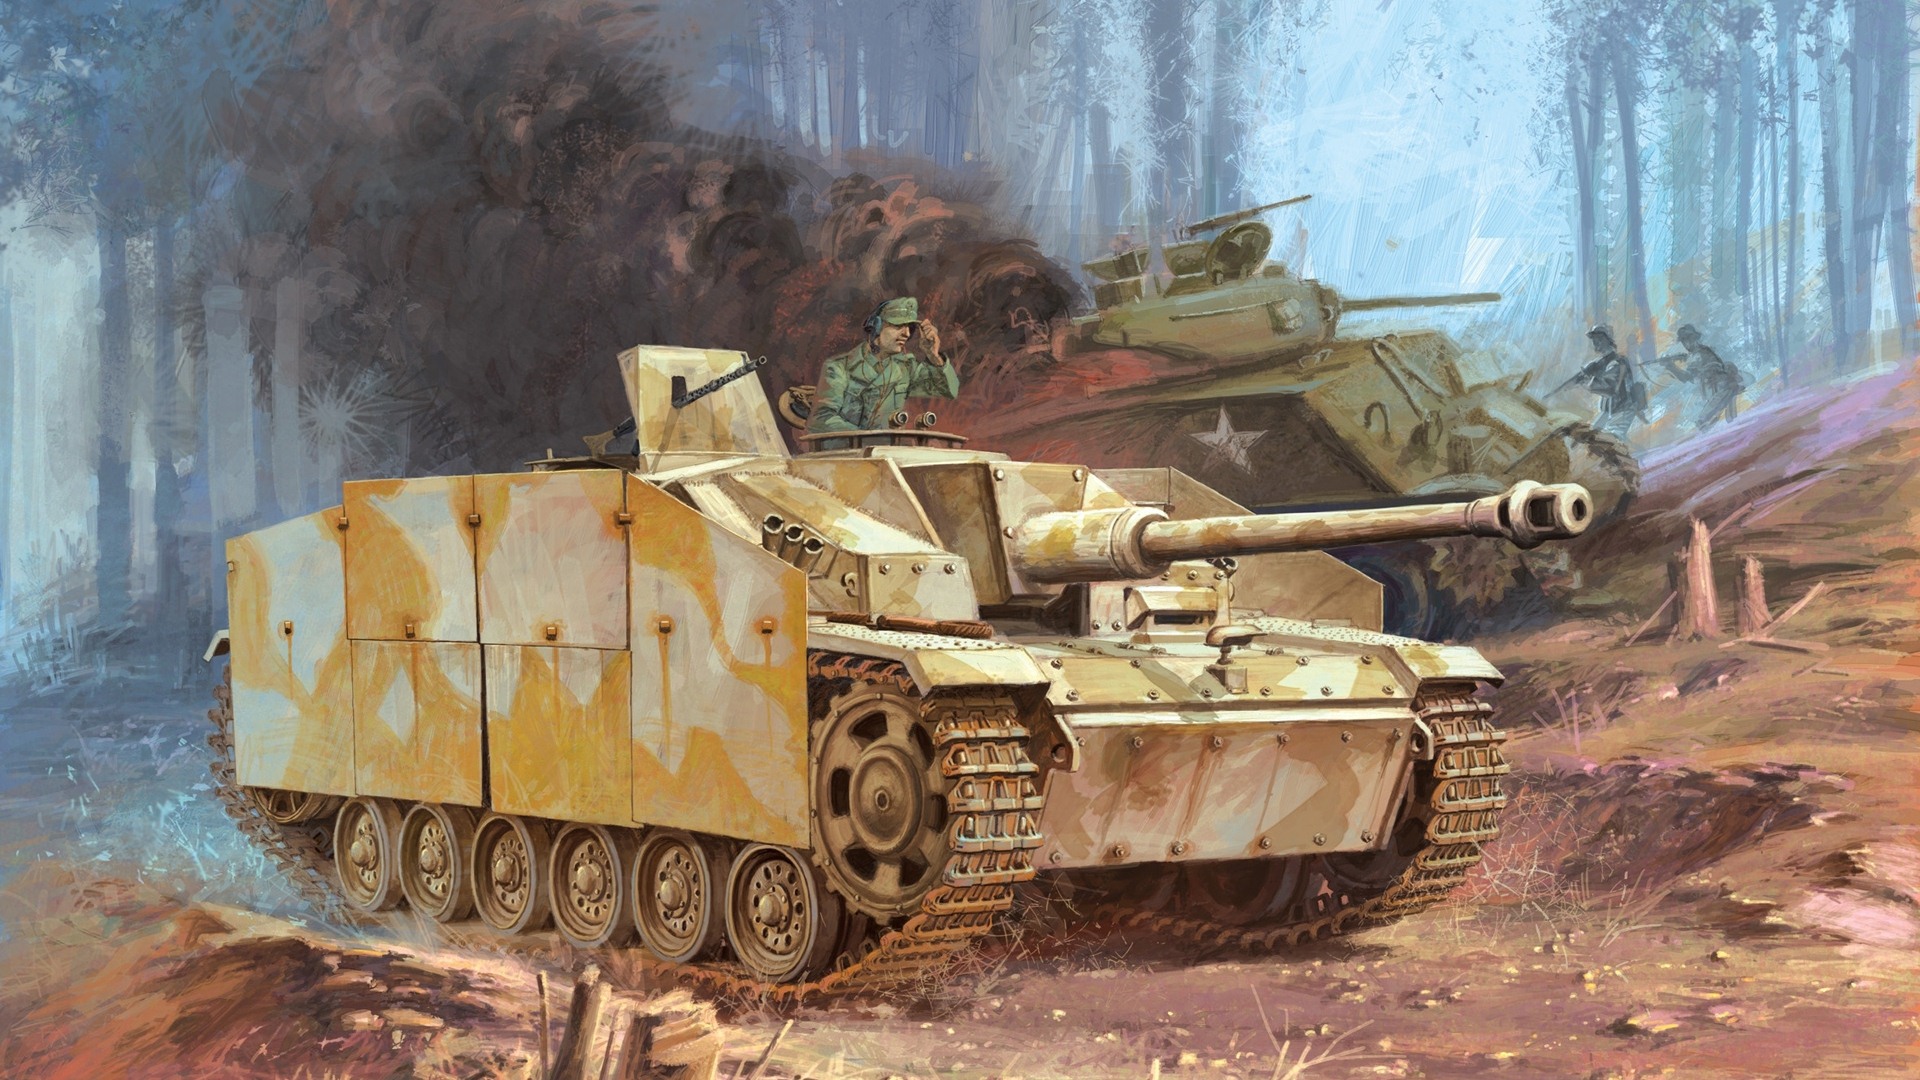 Military tanks, armored HD painting wallpapers #3 - 1920x1080